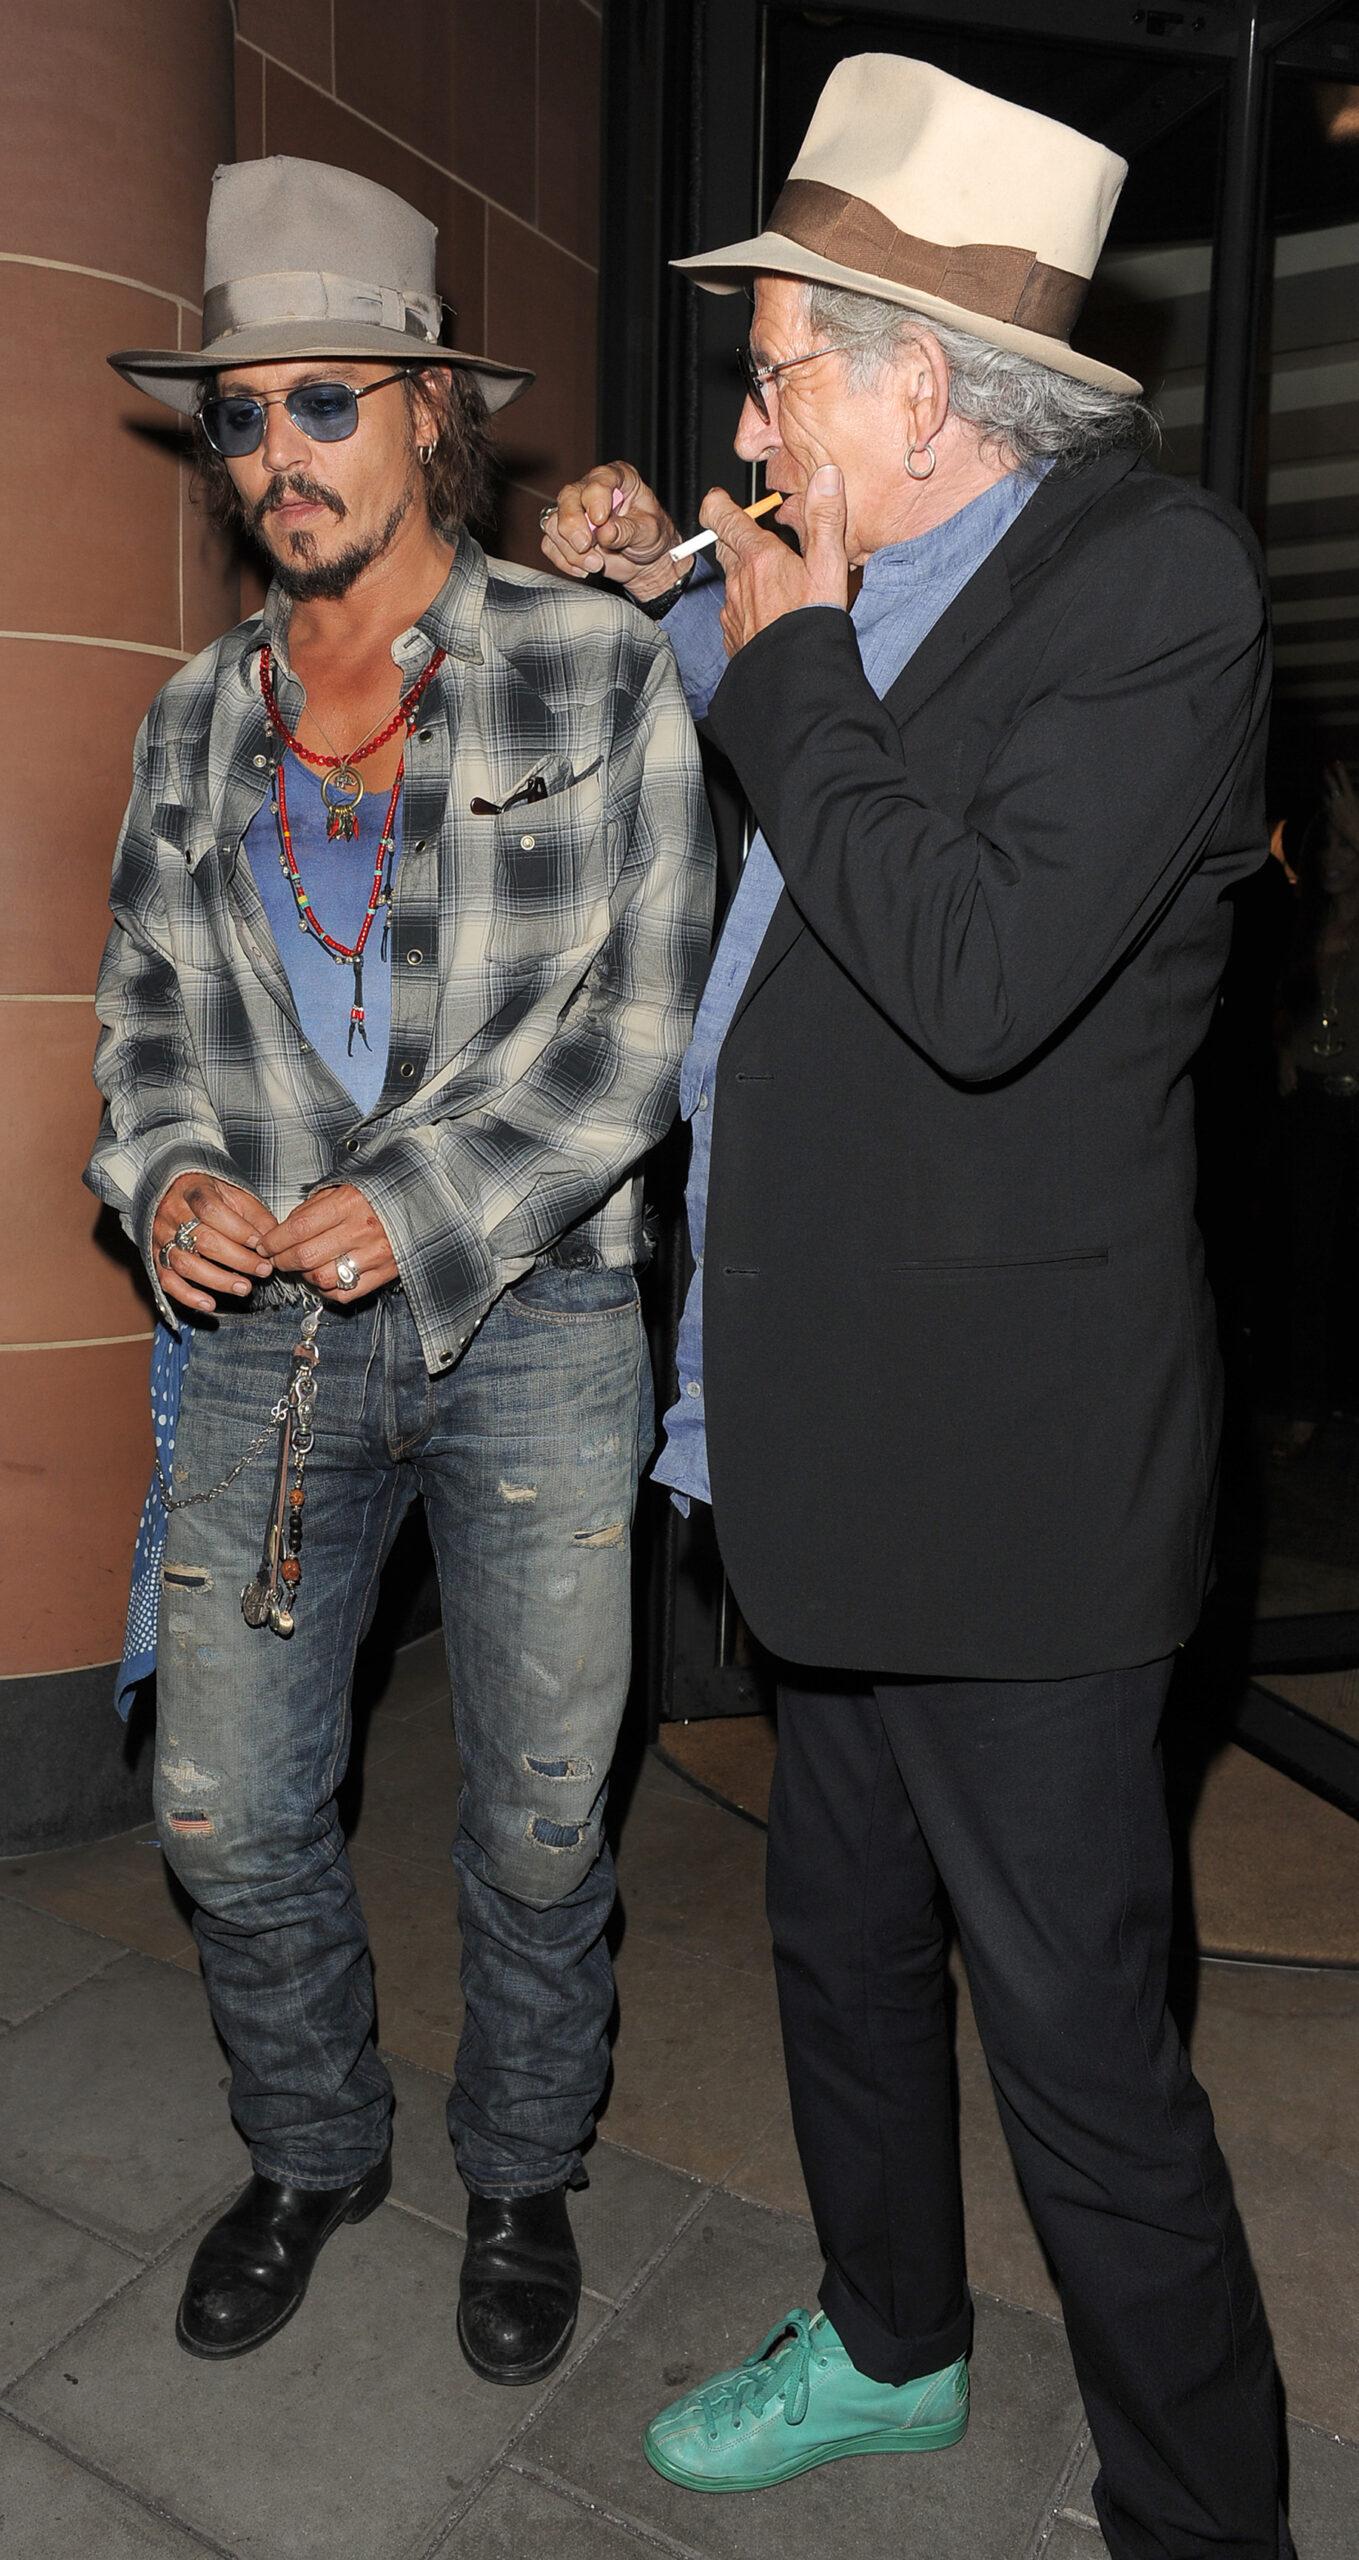 Johnny Depp and Keith Richards both wearing fedora hats and sunglasses leaving apos C London apos restaurant Depp was sporting some cuts on his face and a rather painful bruise on his lower cheek